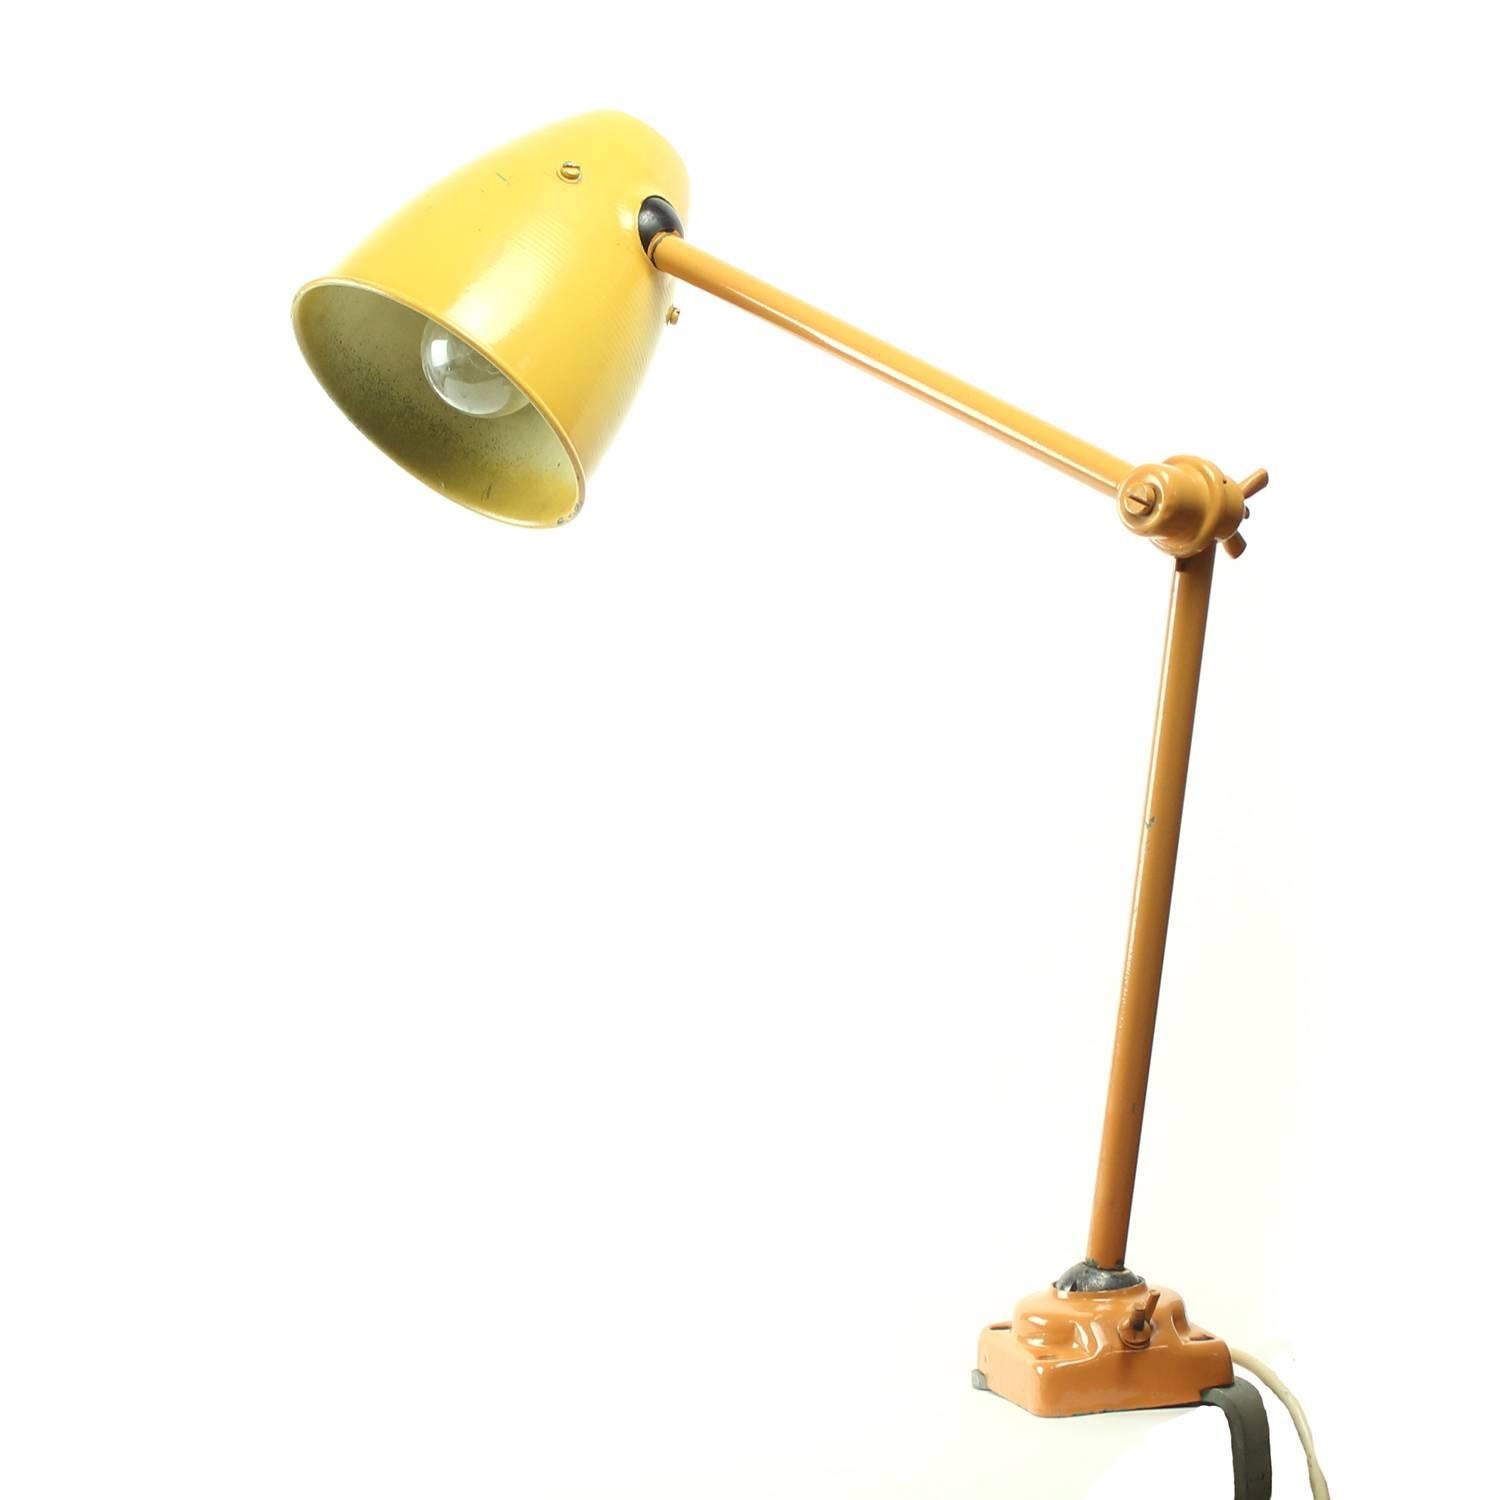 Simple, strong and very industrial. In its original orange color, this office lamp will make a statement on any working desk. The metal construction is in more orange color, the shield is also made of metal and is more yellowish. The lamp is made